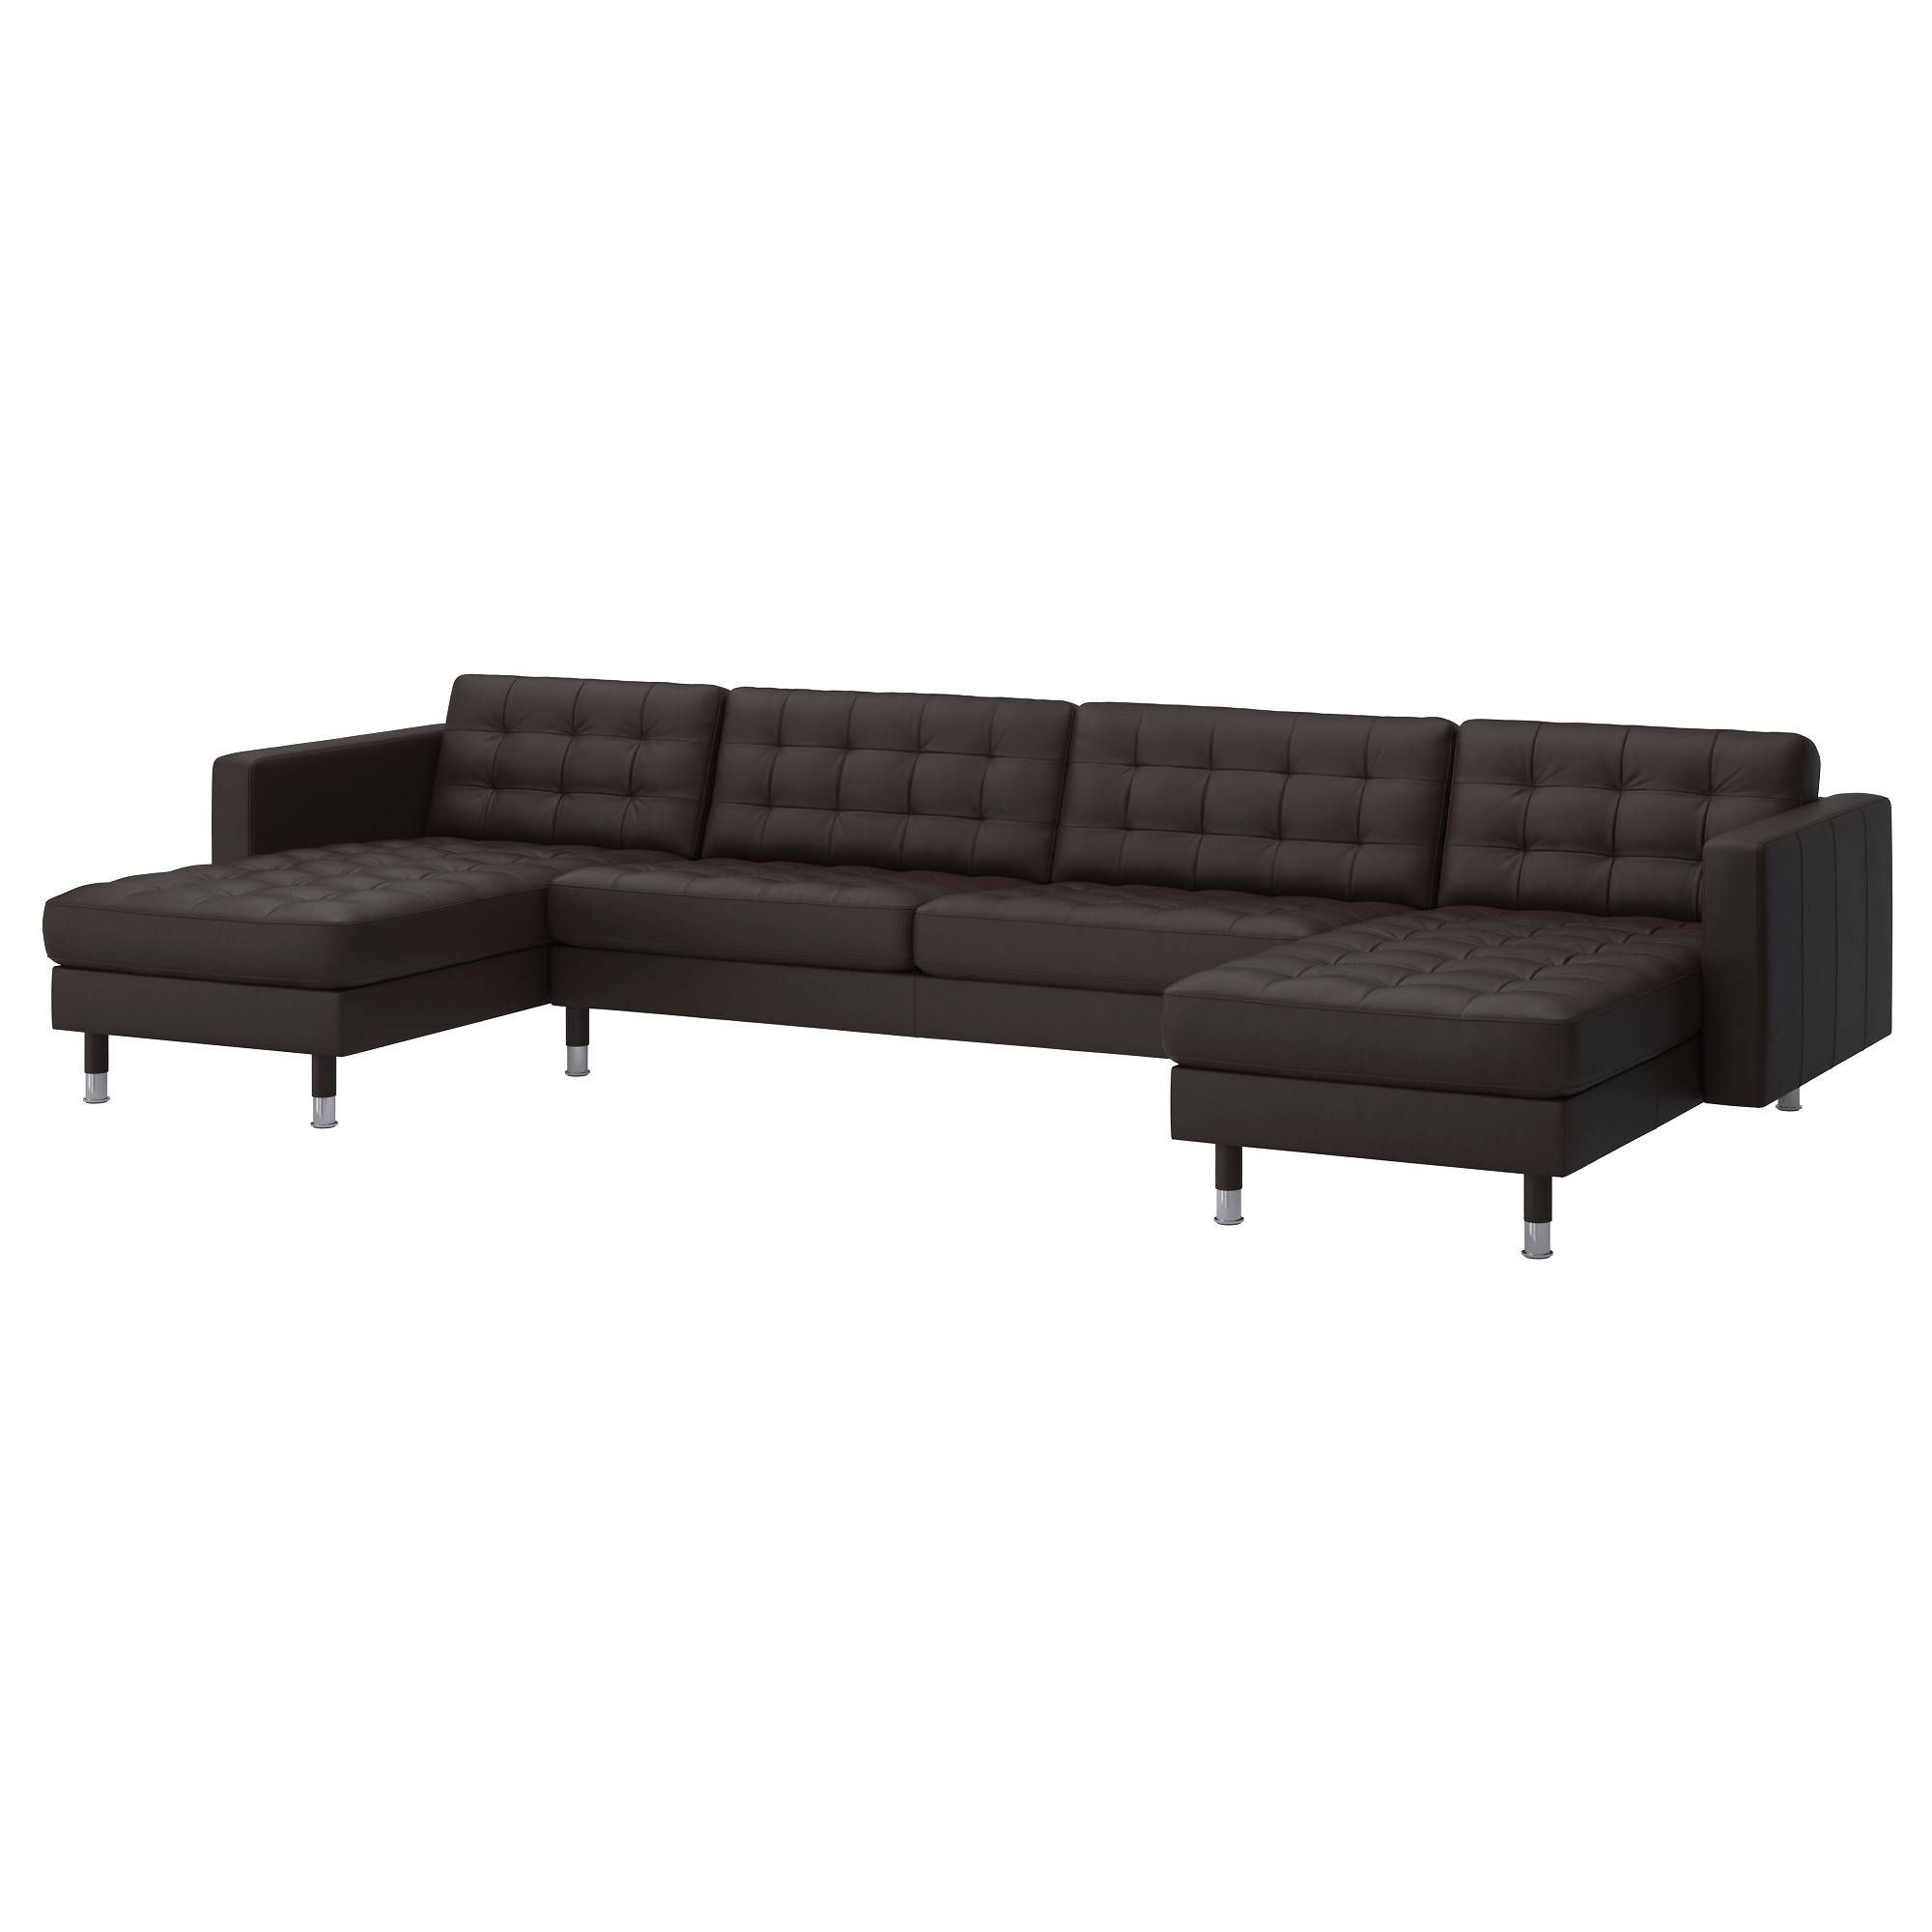 Sectional Sofas & Couches – Ikea For Ikea Sectional Sofa Bed (View 25 of 25)